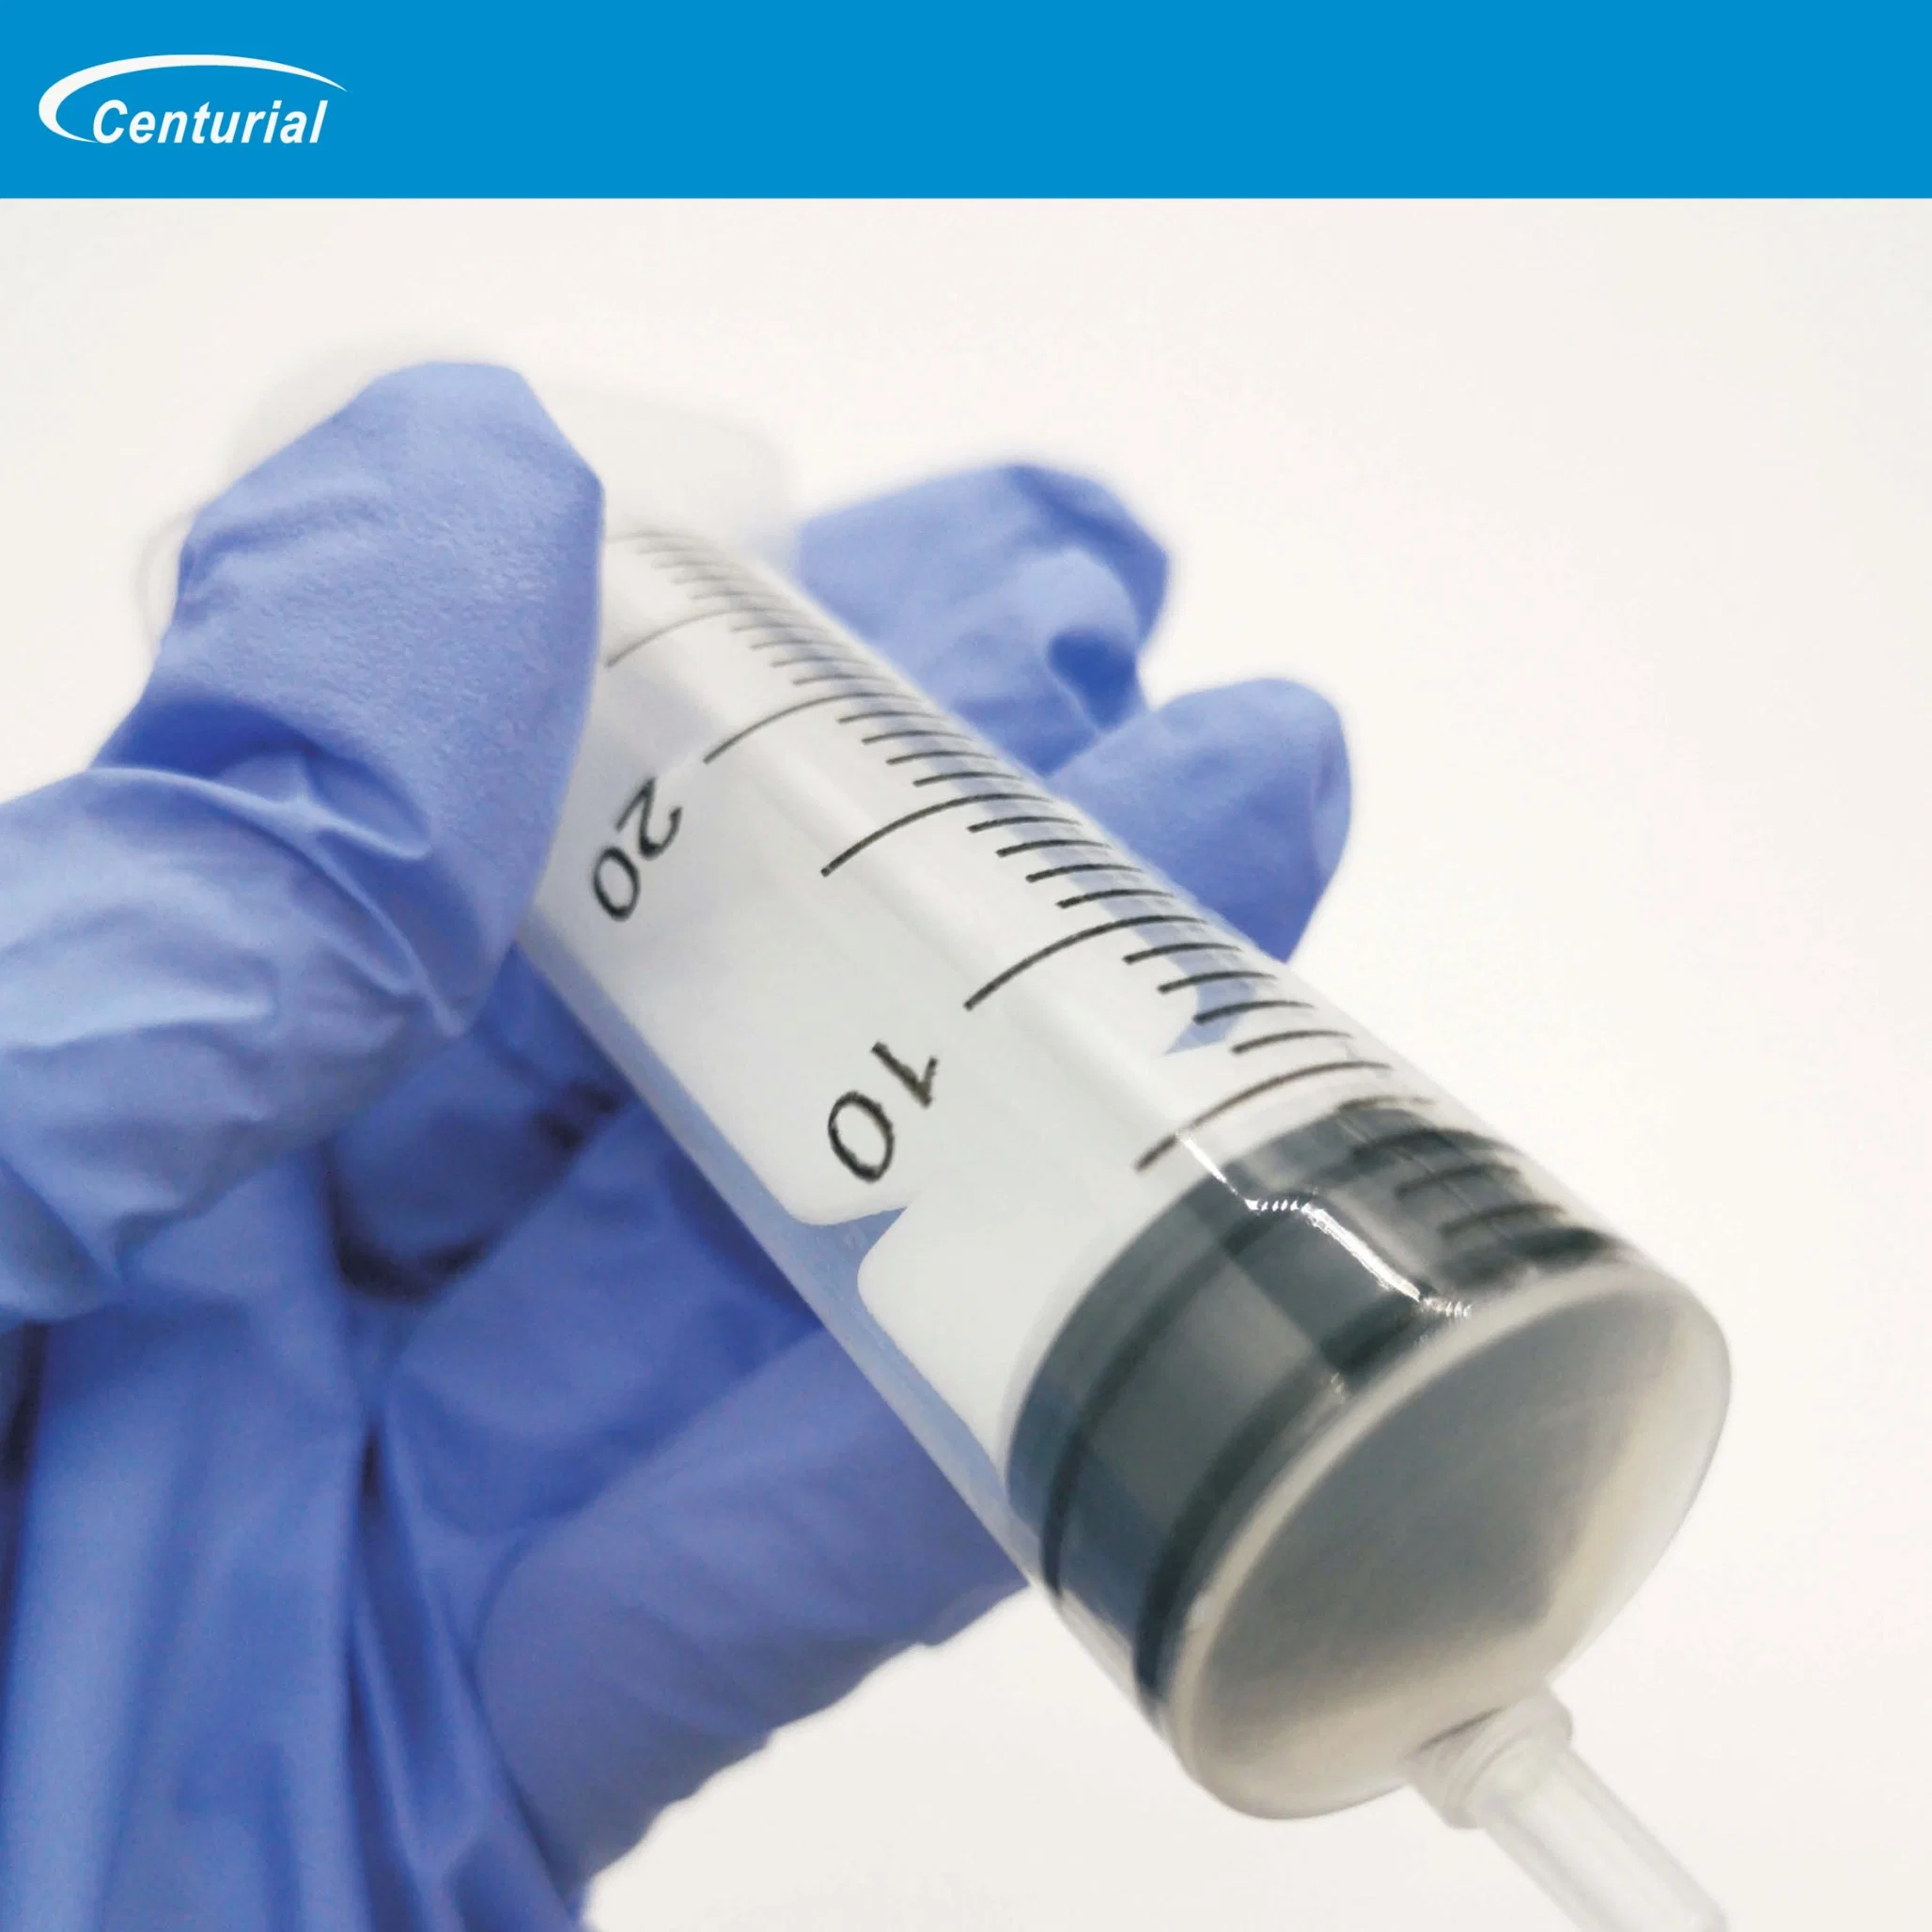 High Quality Sterile Syringe with Needle for Single Use